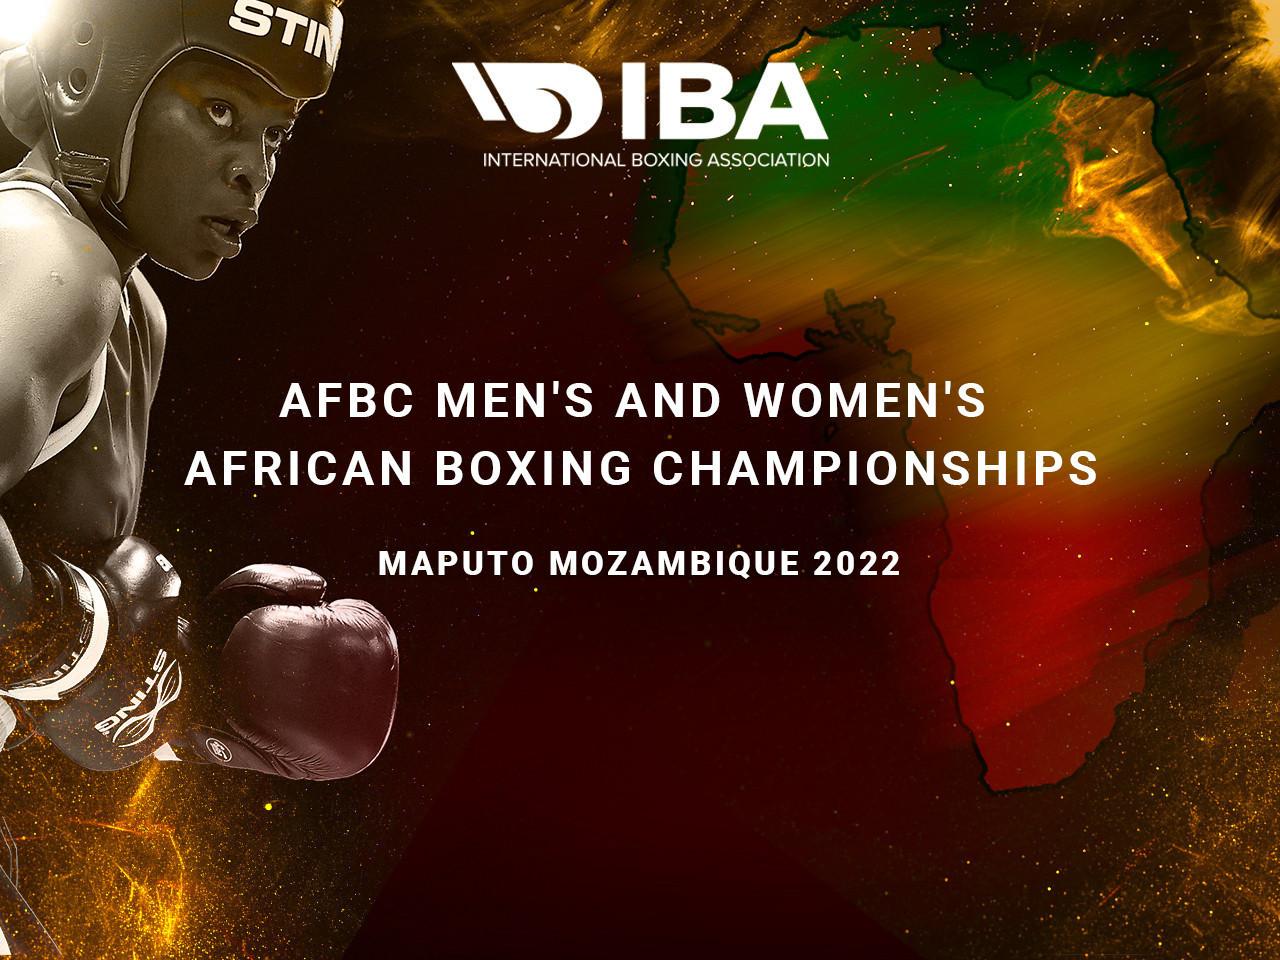 Mozambique fighters flourish at African Men's and Women's Boxing Championships